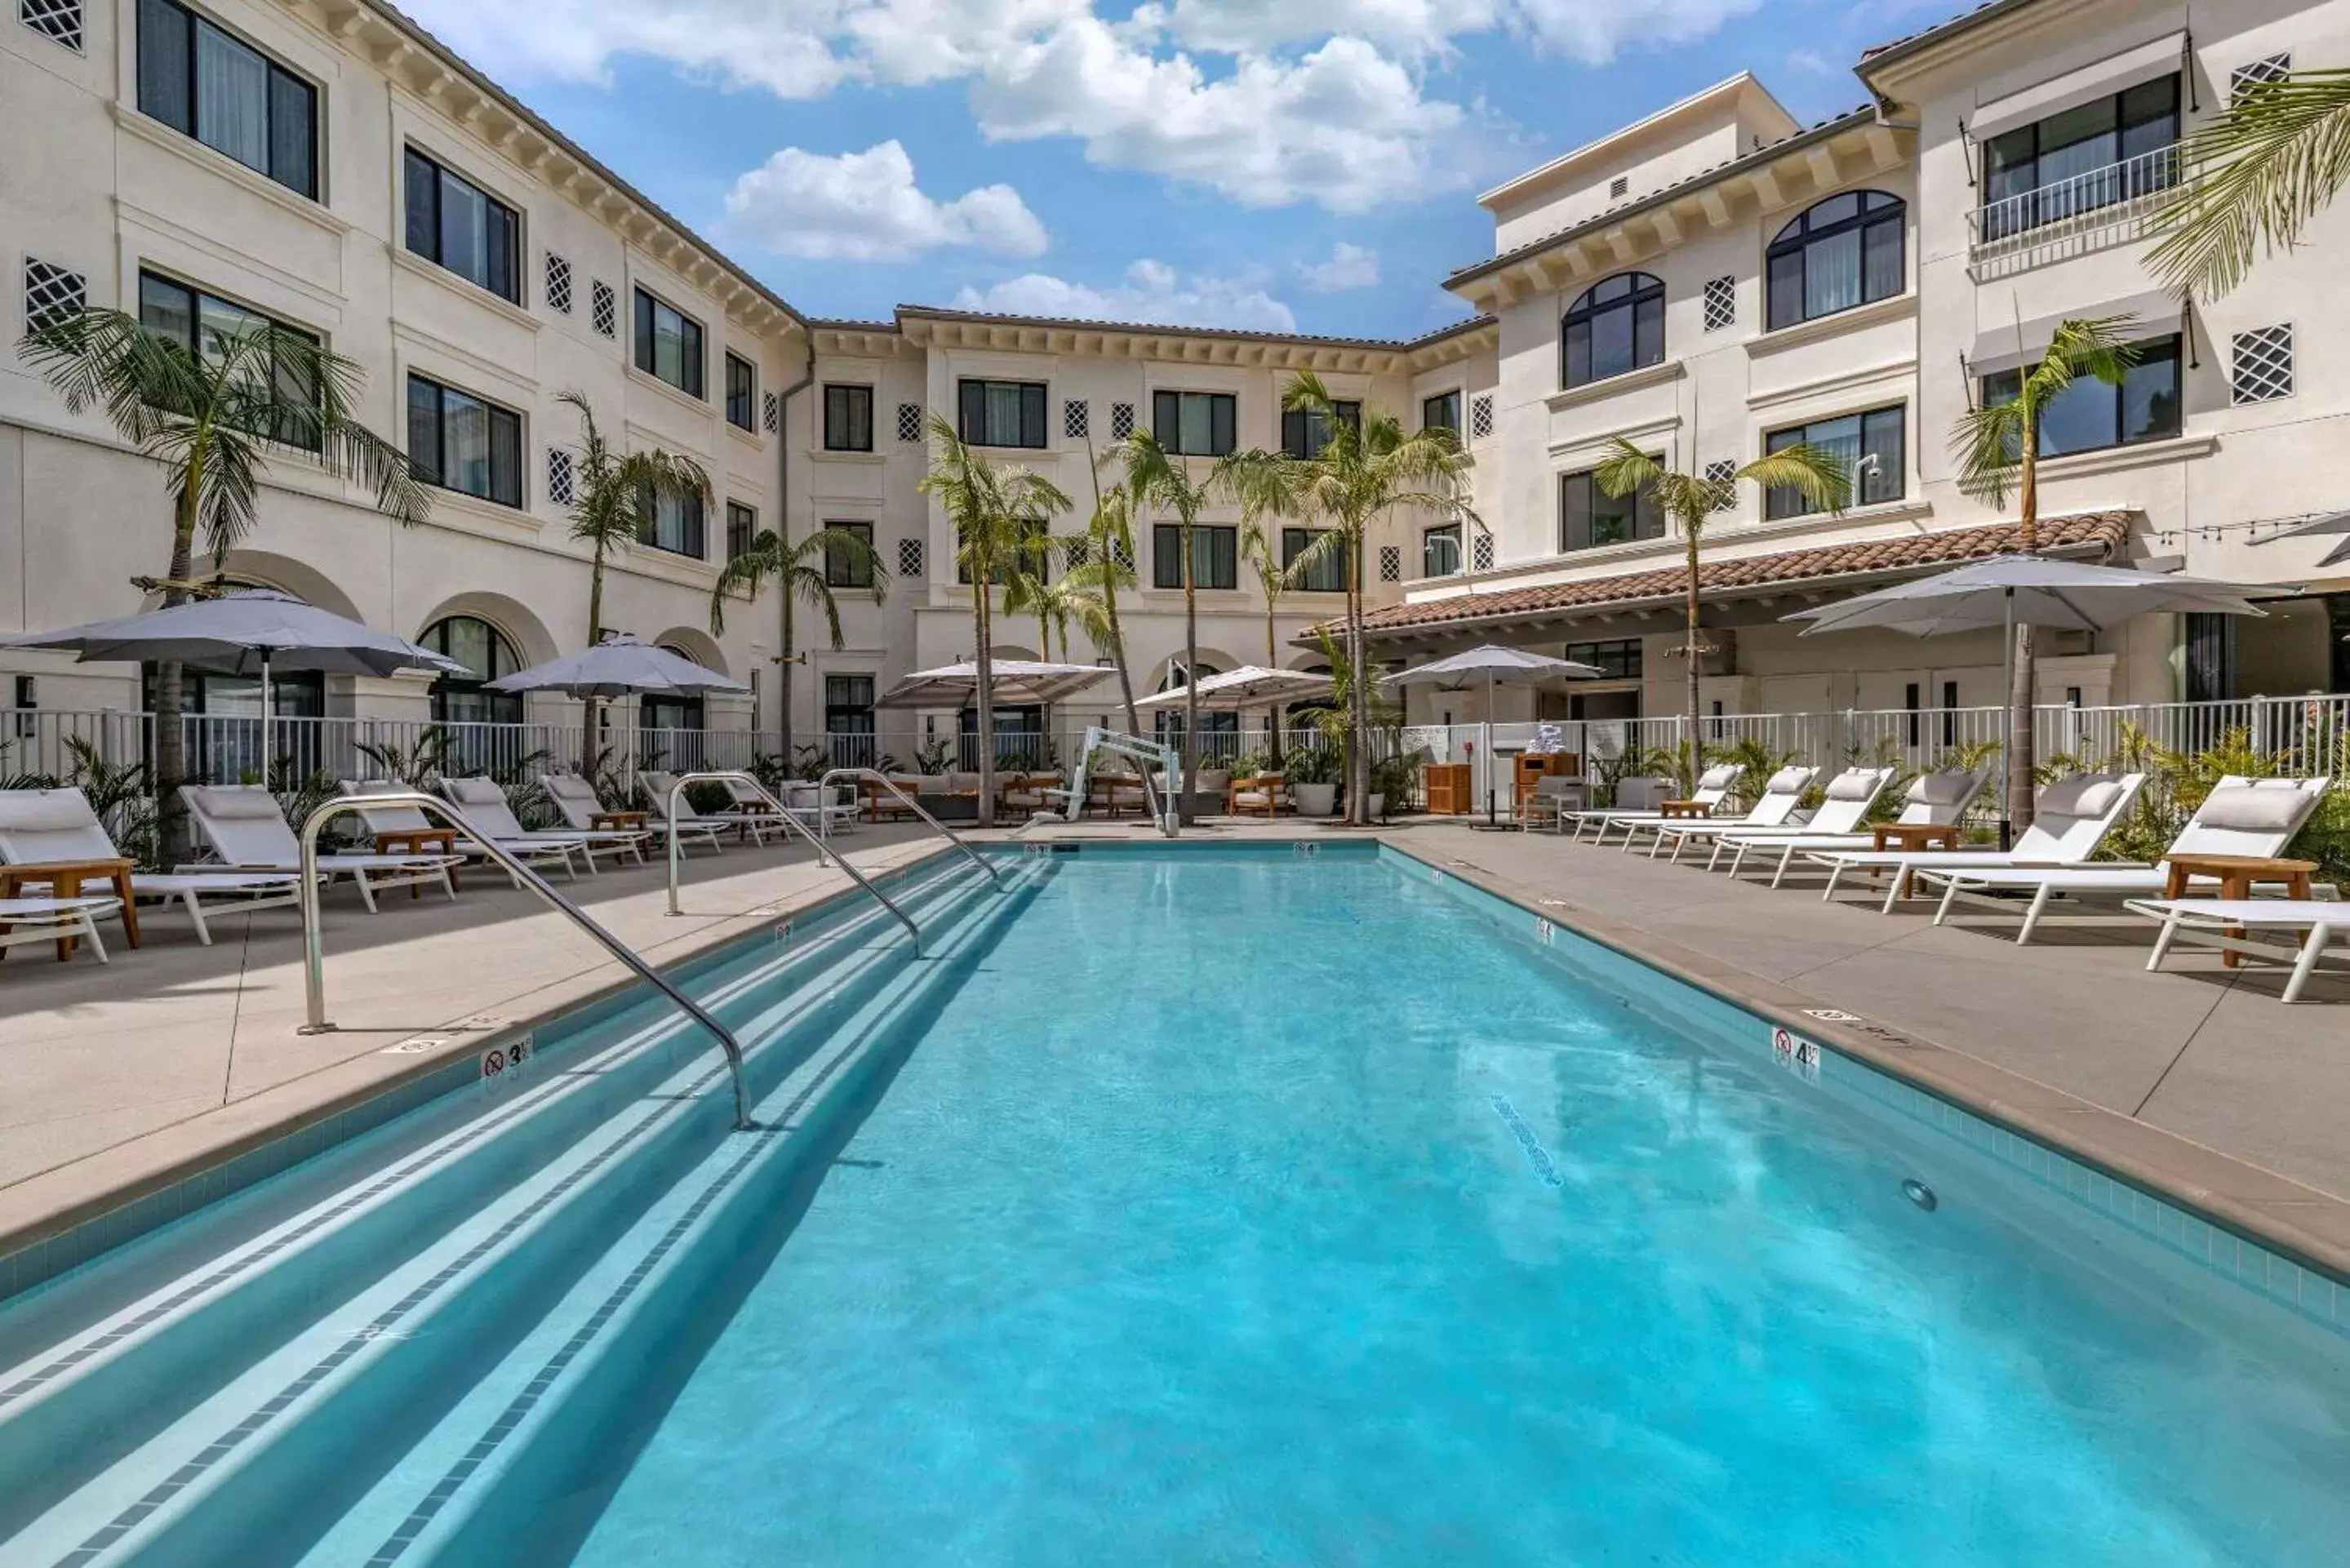 Swimming Pool in Cambria Hotel Calabasas